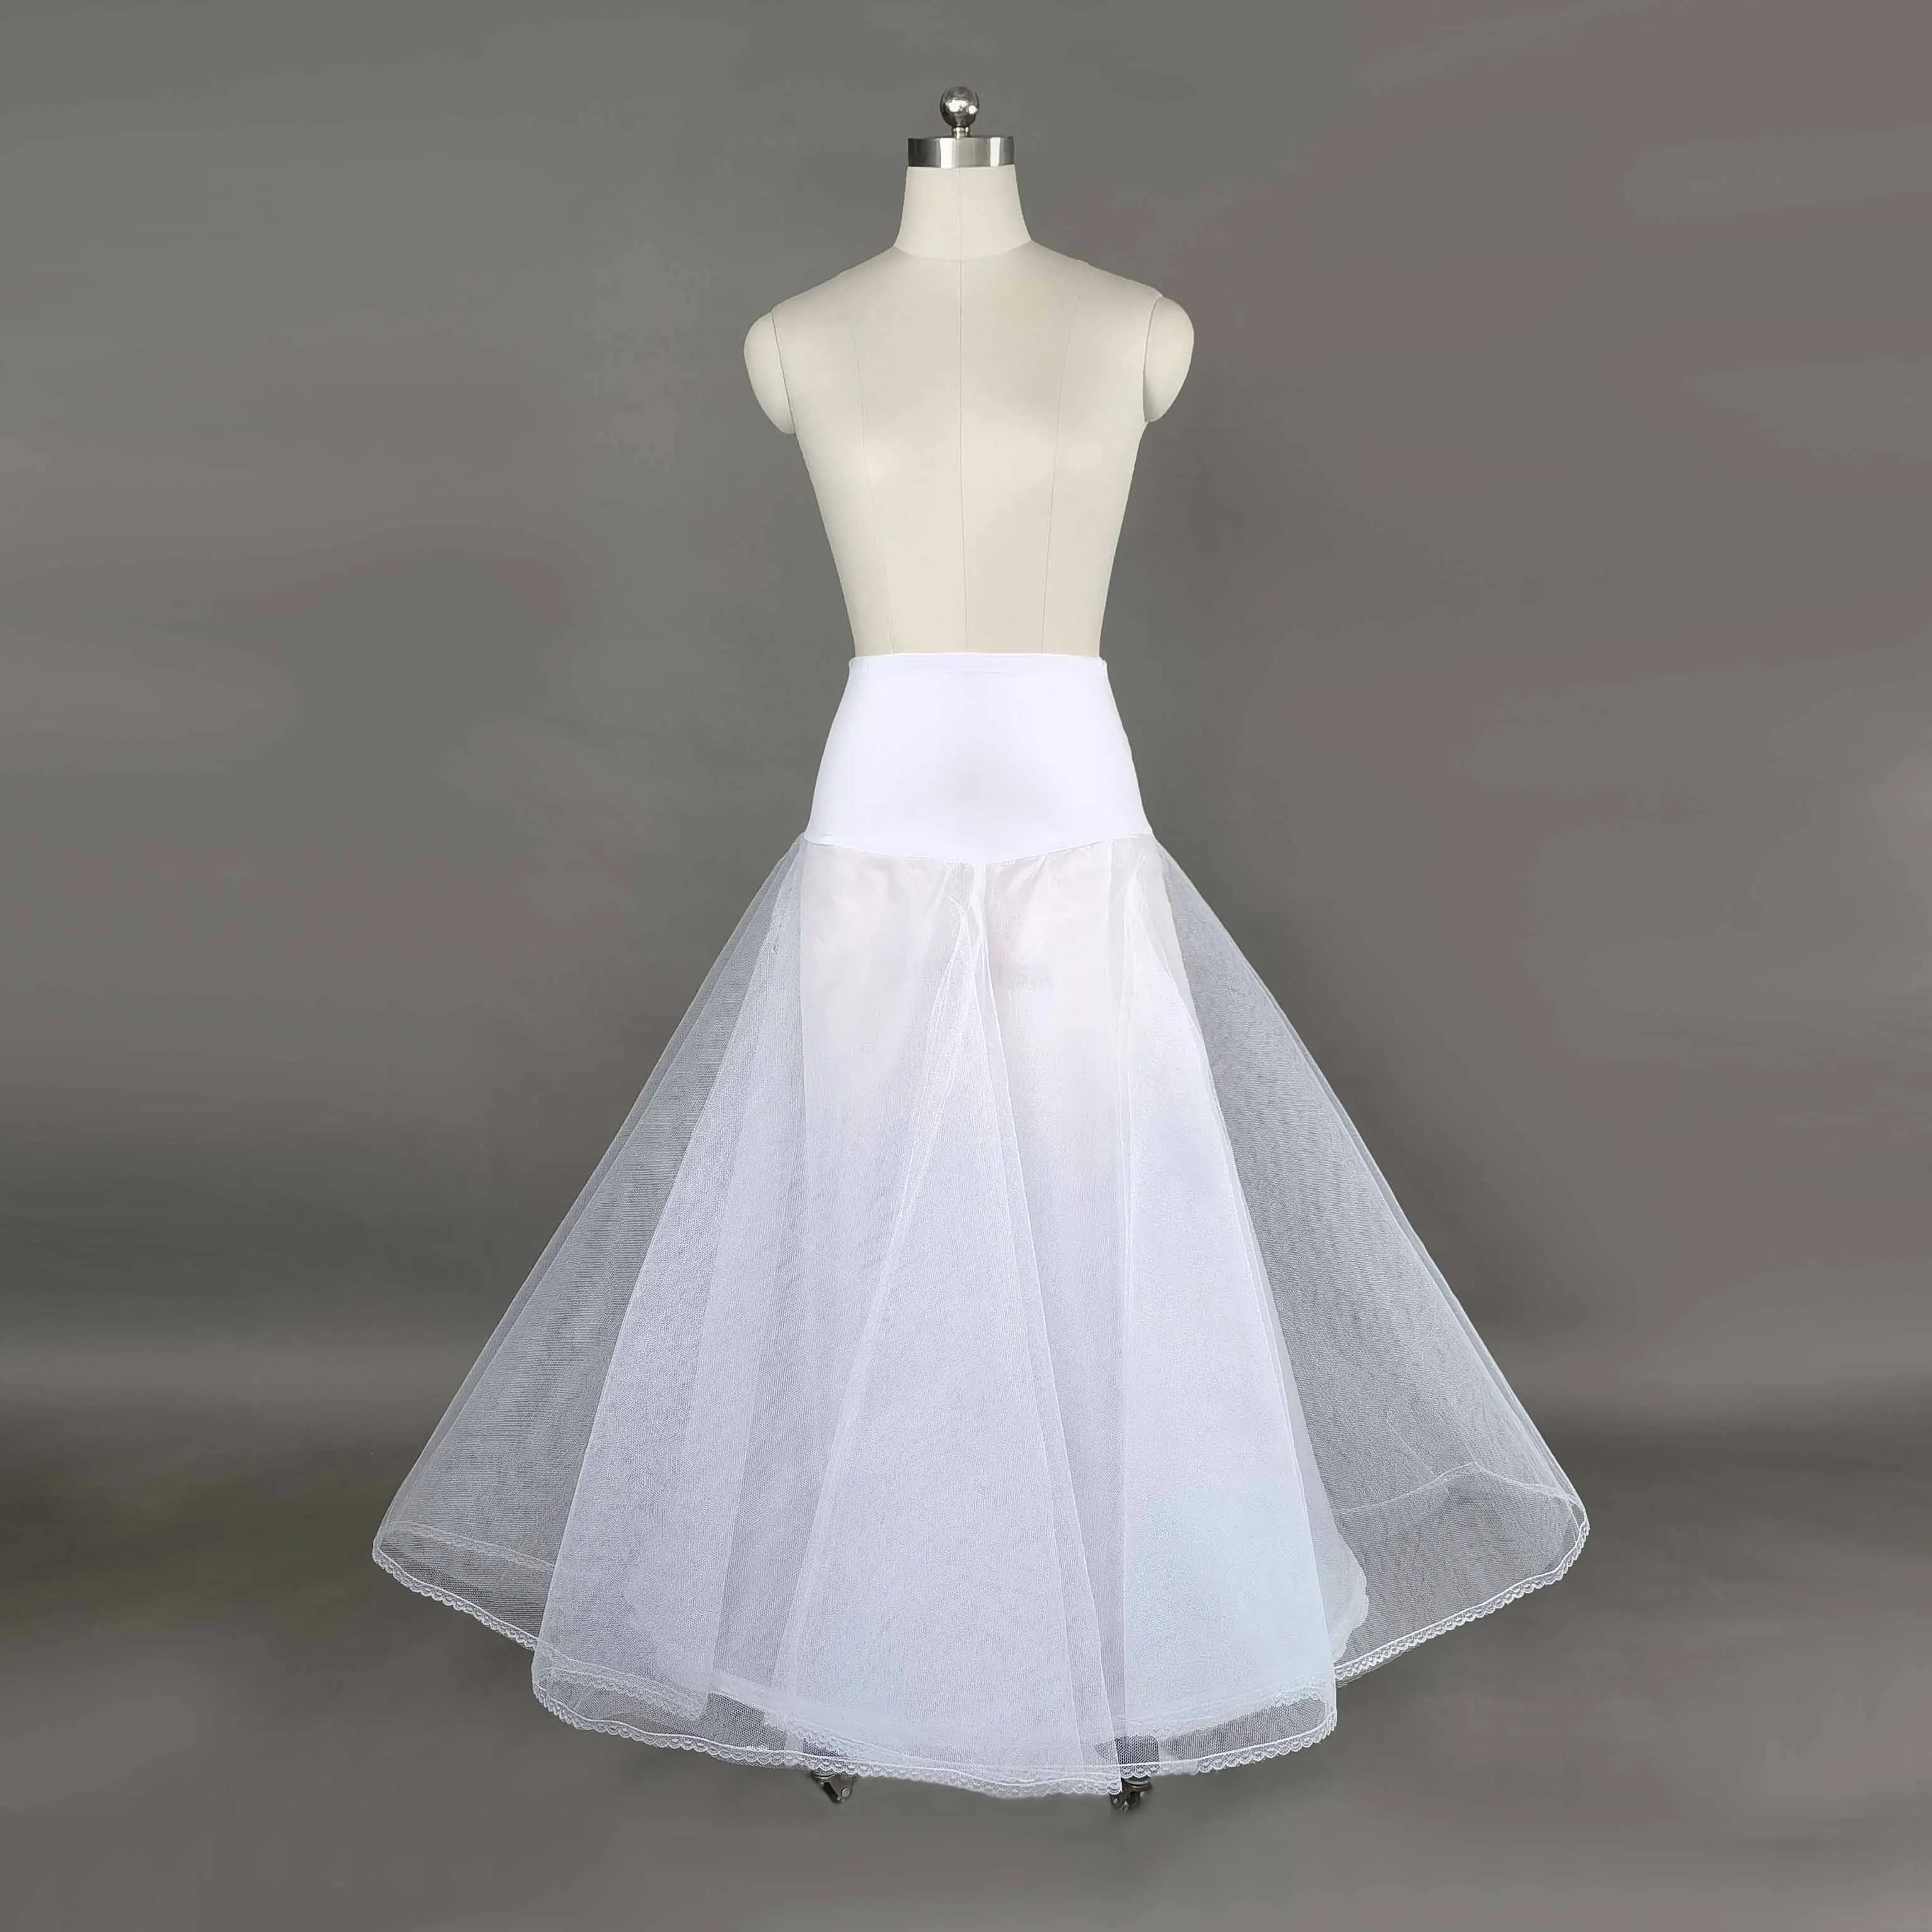 A Line 1-Hoop Petticoat 2 Layers 1 Lining Bridal Full Length Ball Gown Slips Tulle Wedding Dresses Accessorie Underskirt